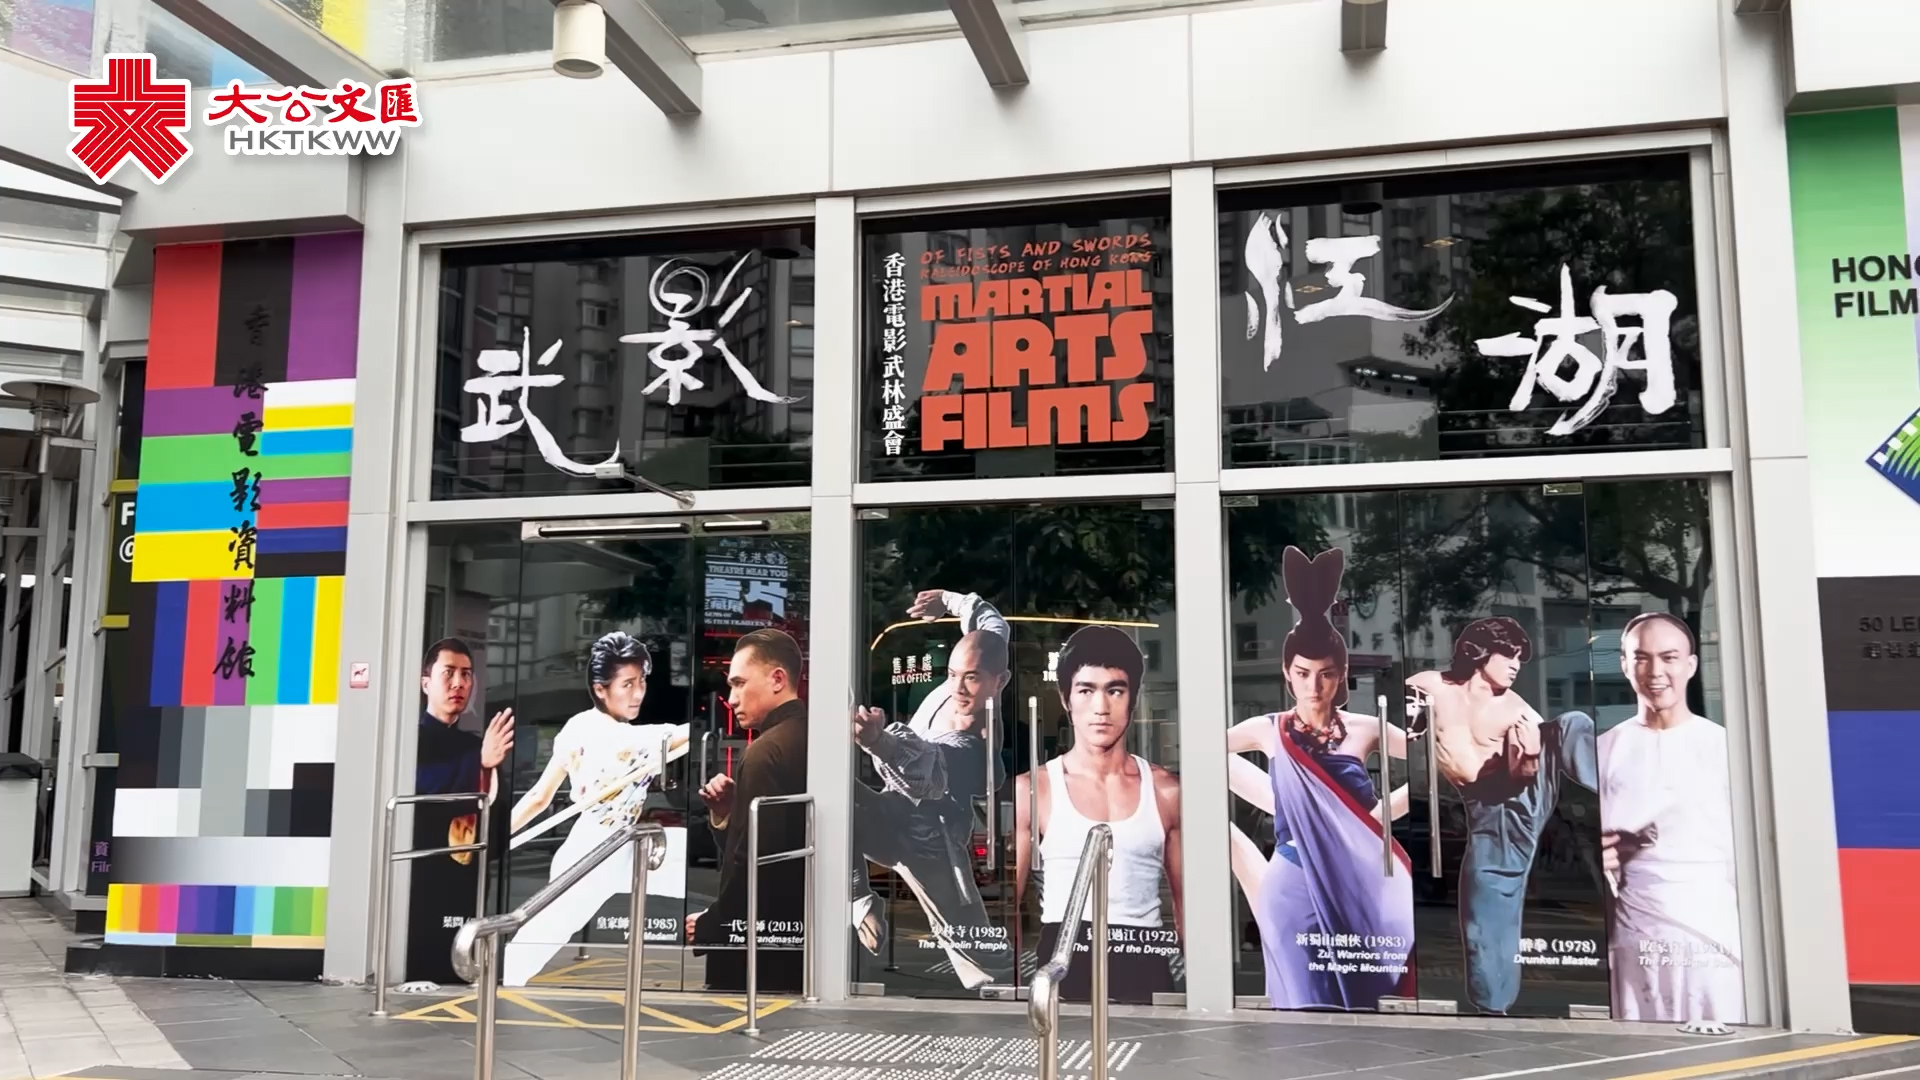  The trailer exhibition of "sewing and mending" of old films has made you addicted to Hong Kong films!